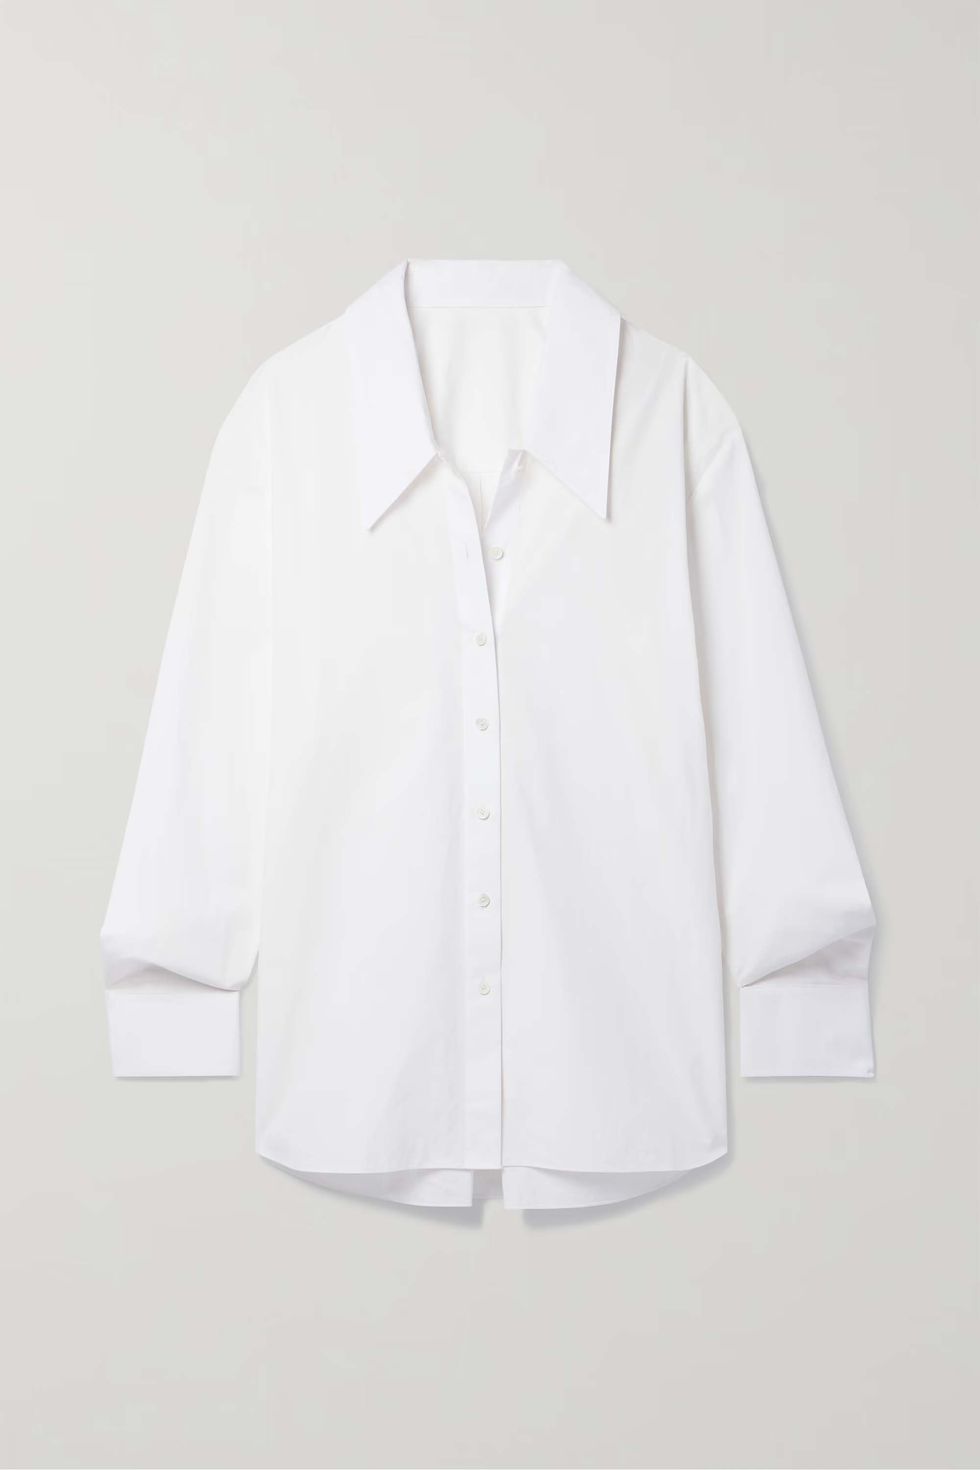 10 white shirts to buy now and wear forever